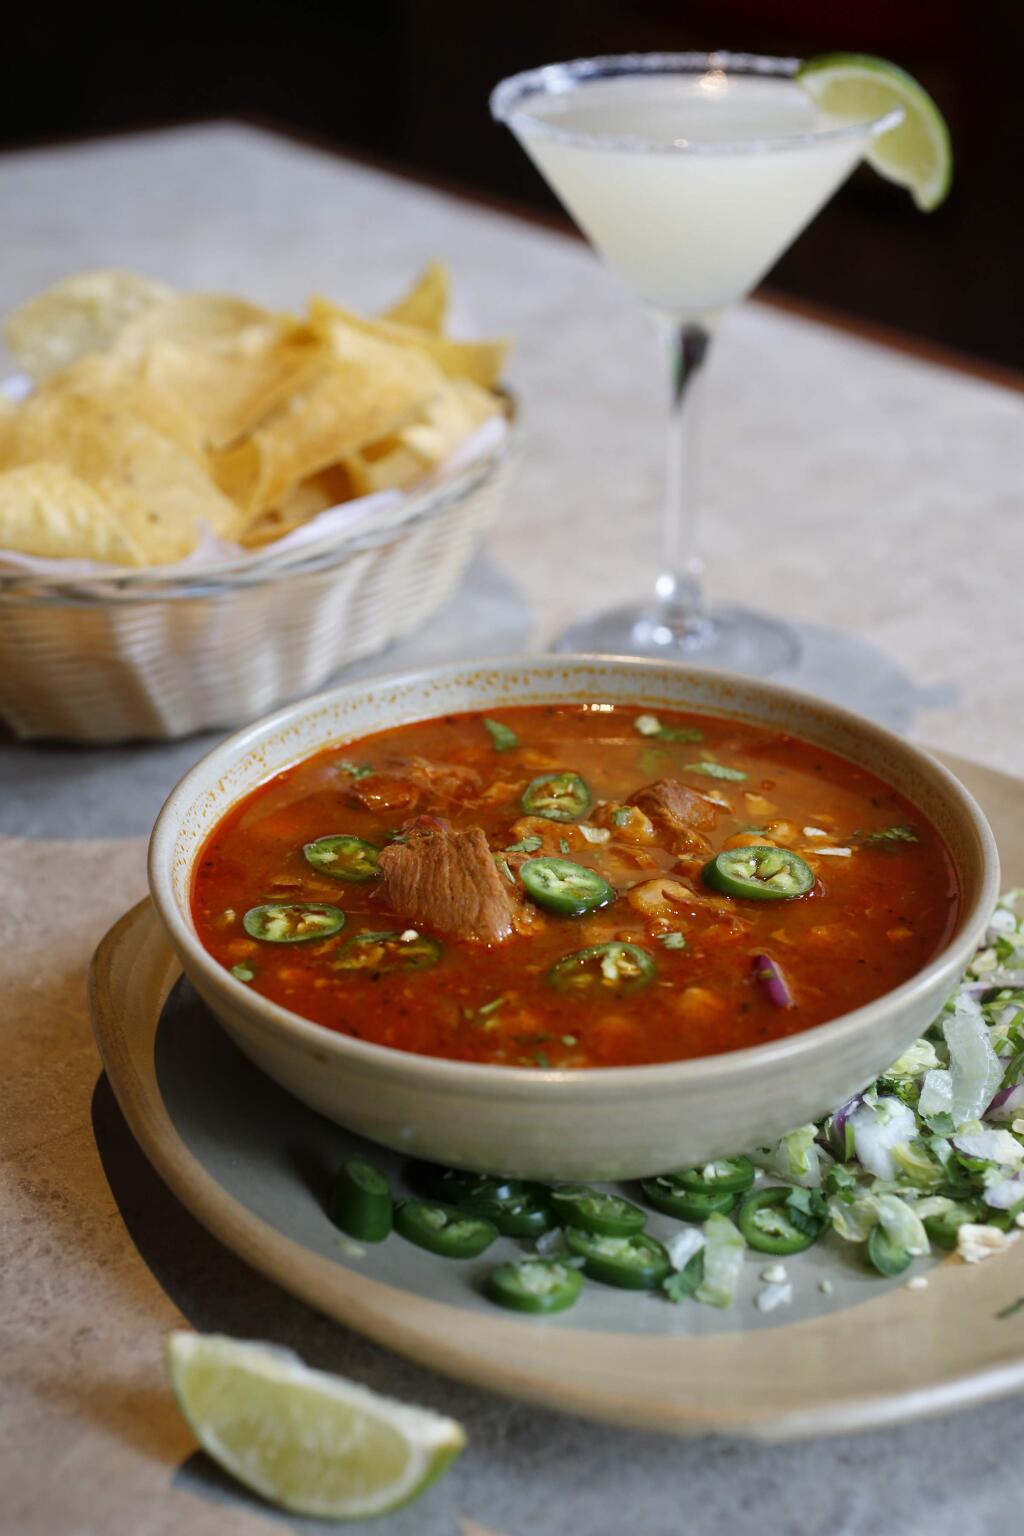 Pork Posole at La Rosa Tequileria & Grille in Santa Rosa, on Tuesday, August 11, 2015. (BETH SCHLANKER/ The Press Democrat)